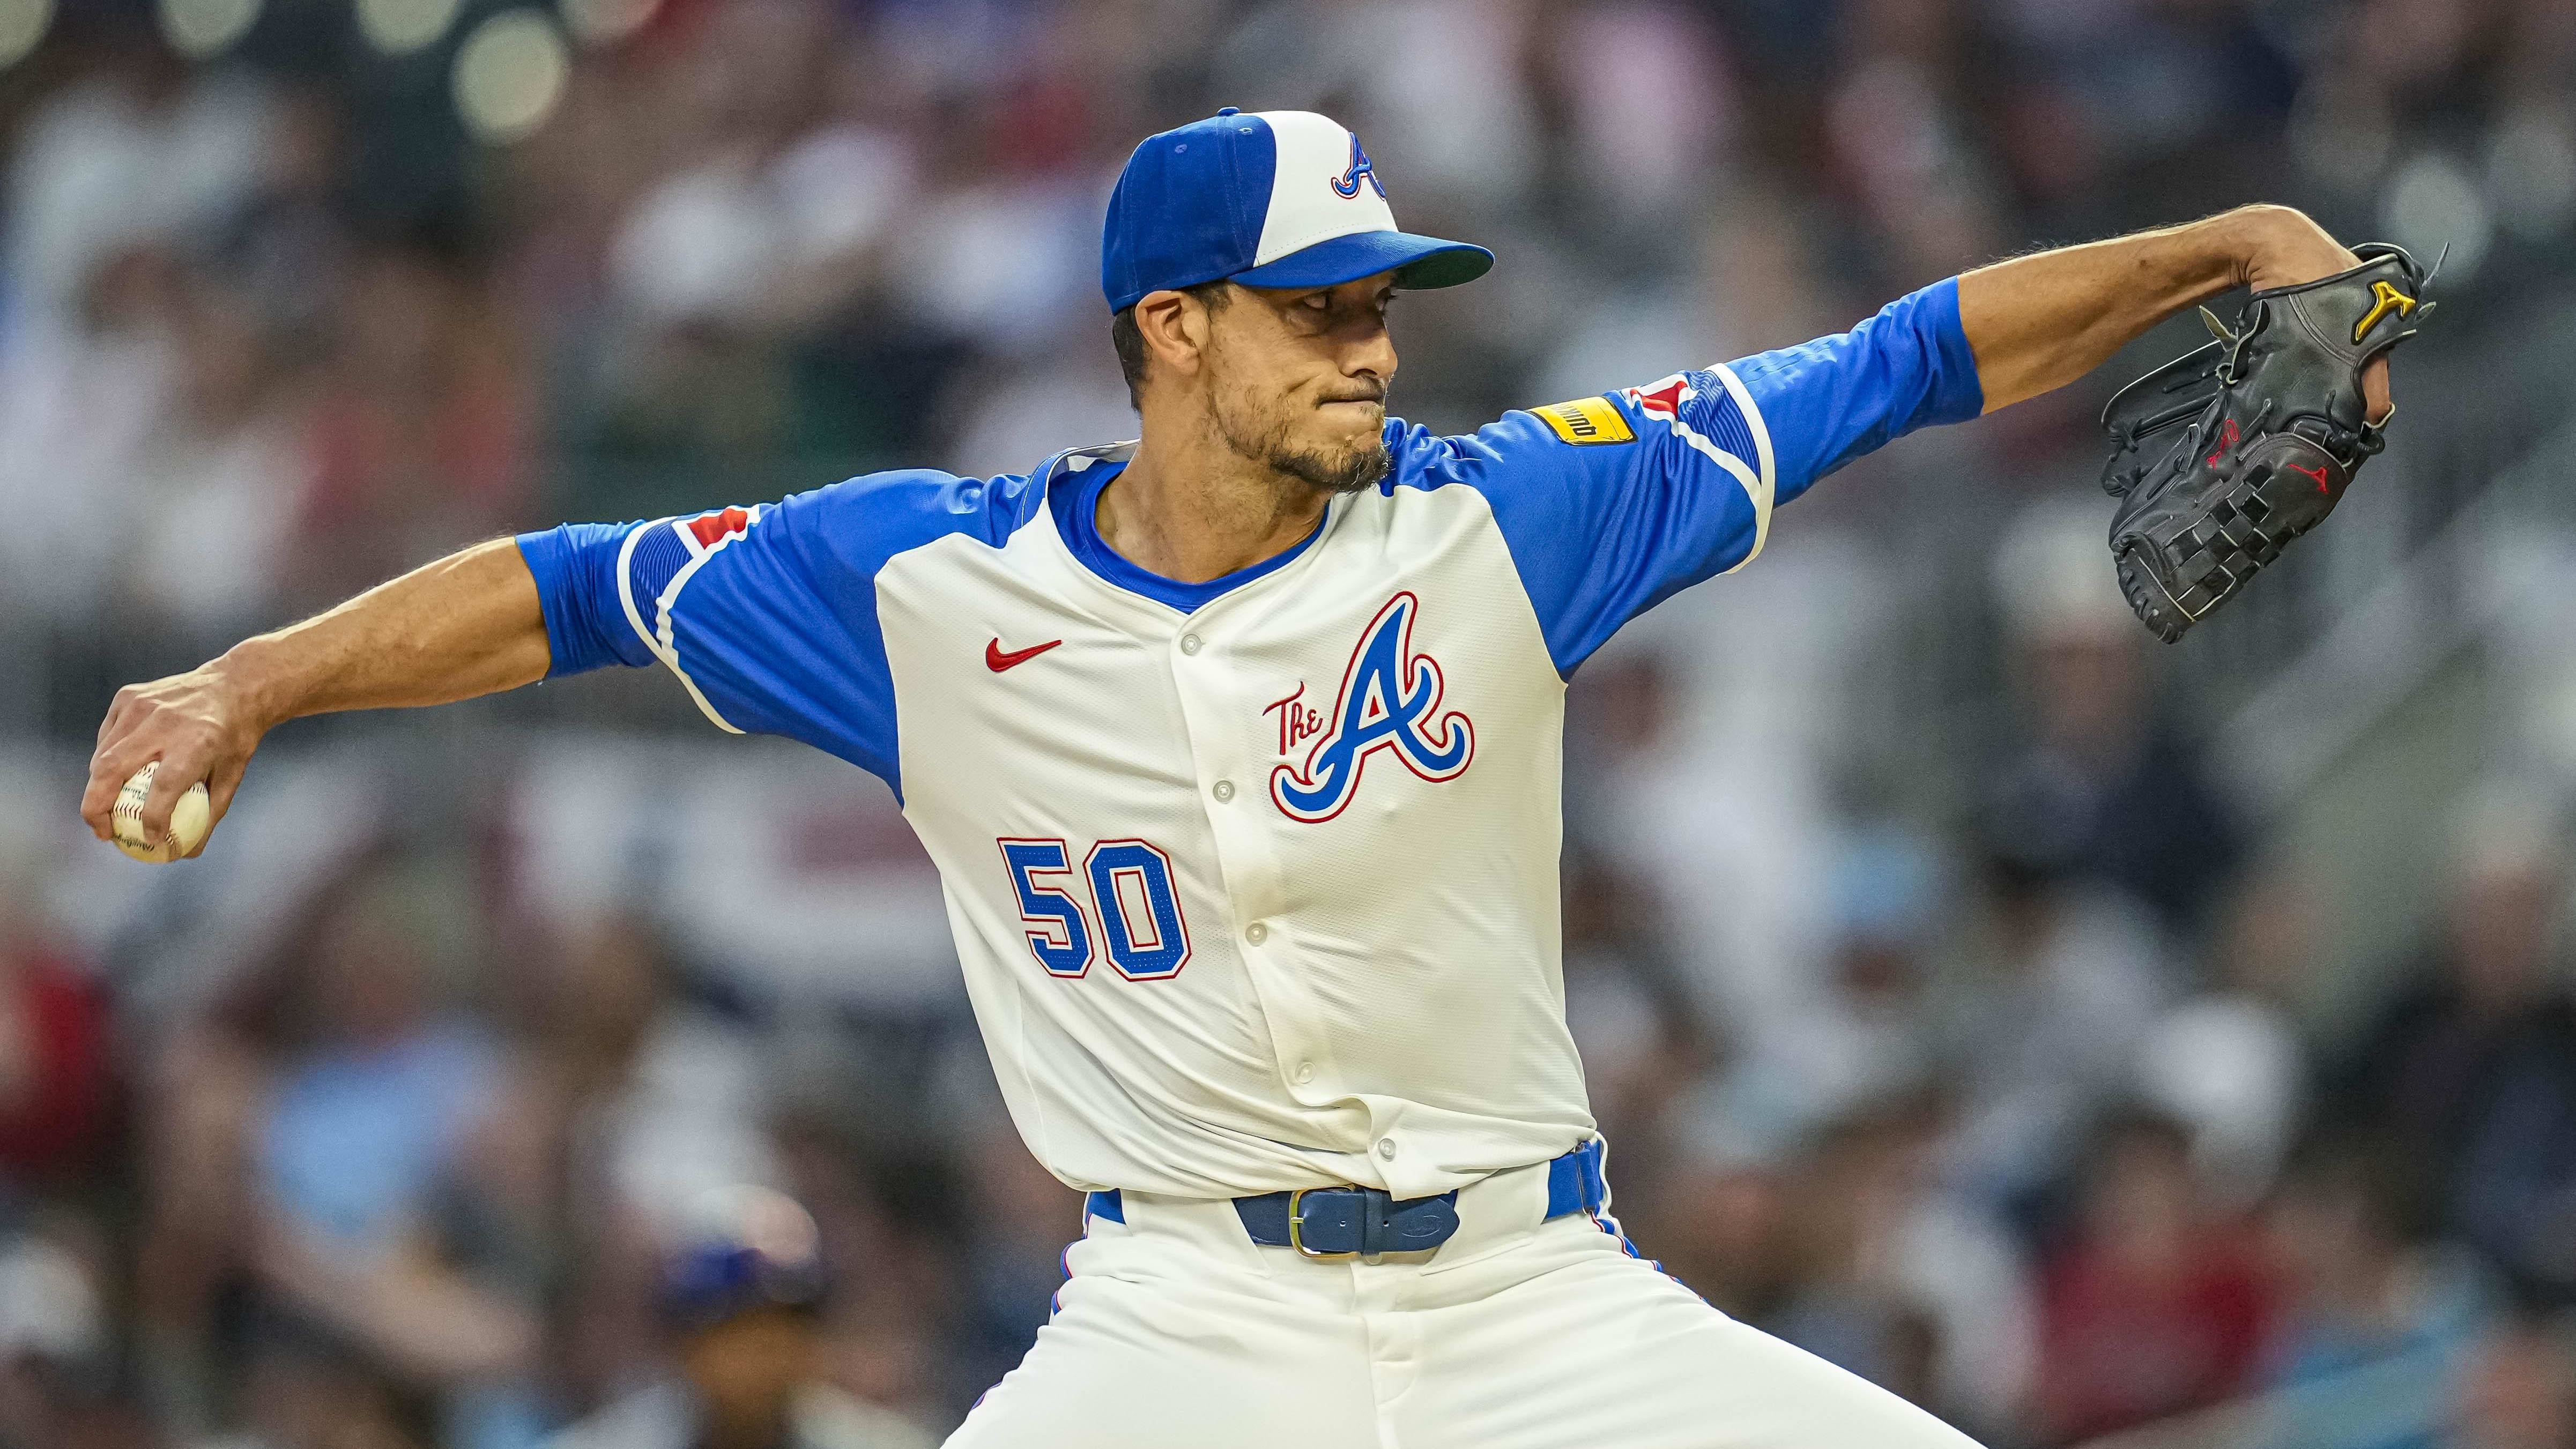 Braves Send Charlie Morton to the Mound, Trying to Win Series Against Marlins